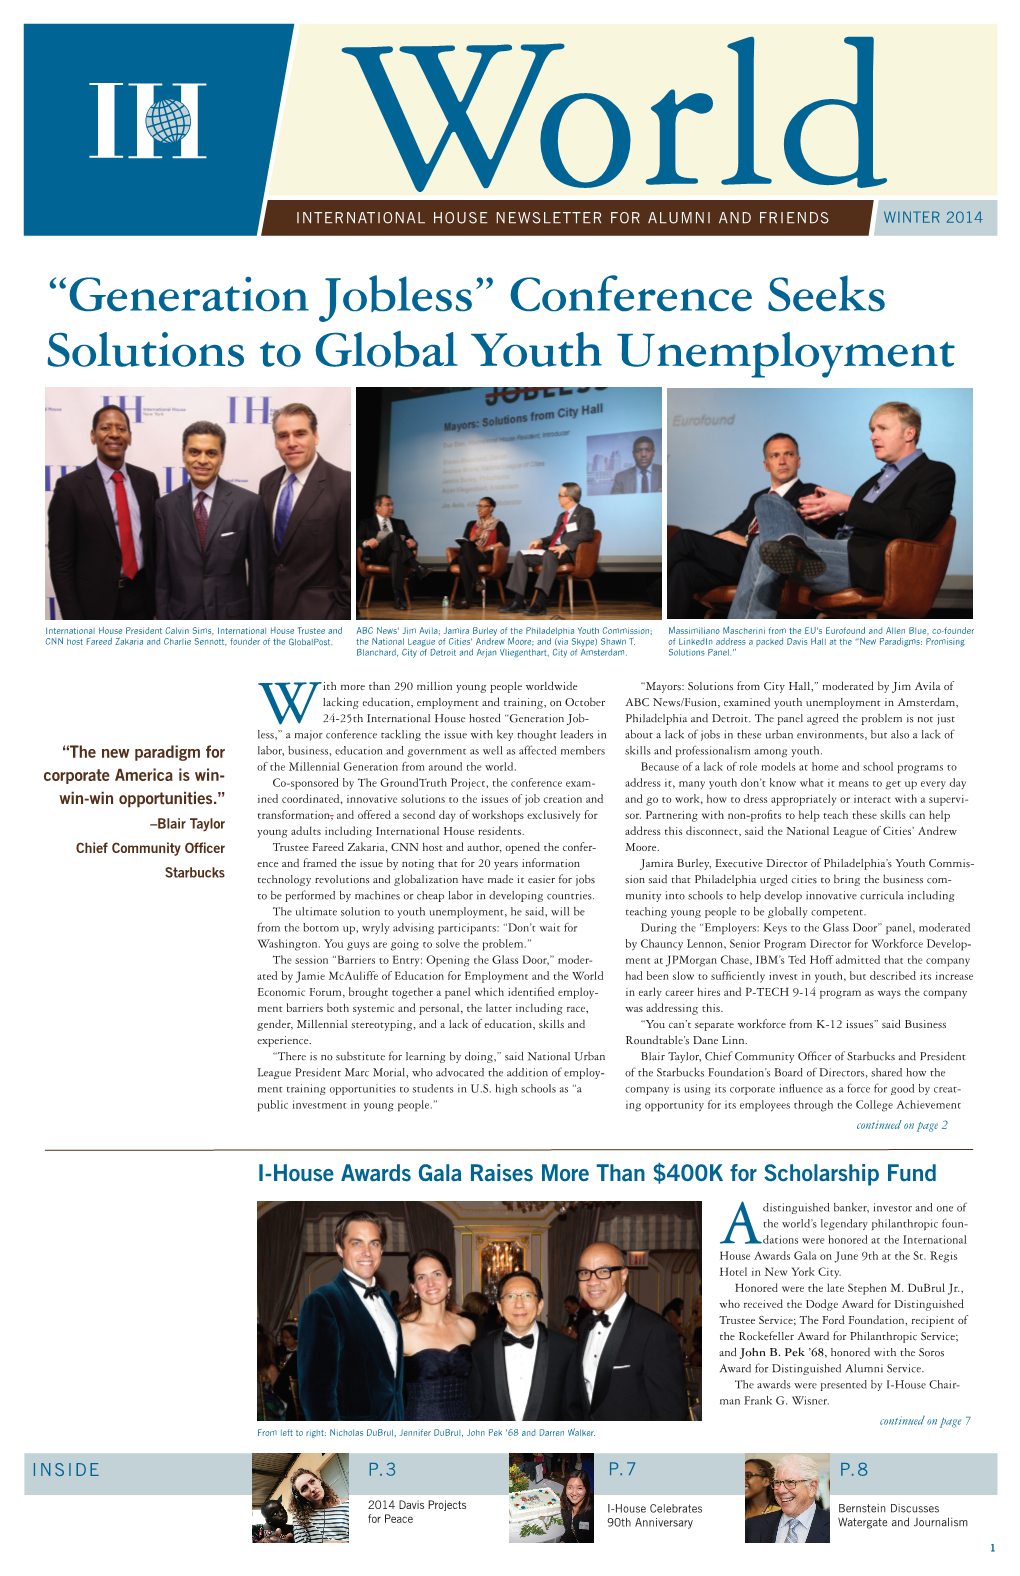 “Generation Jobless” Conference Seeks Solutions to Global Youth Unemployment